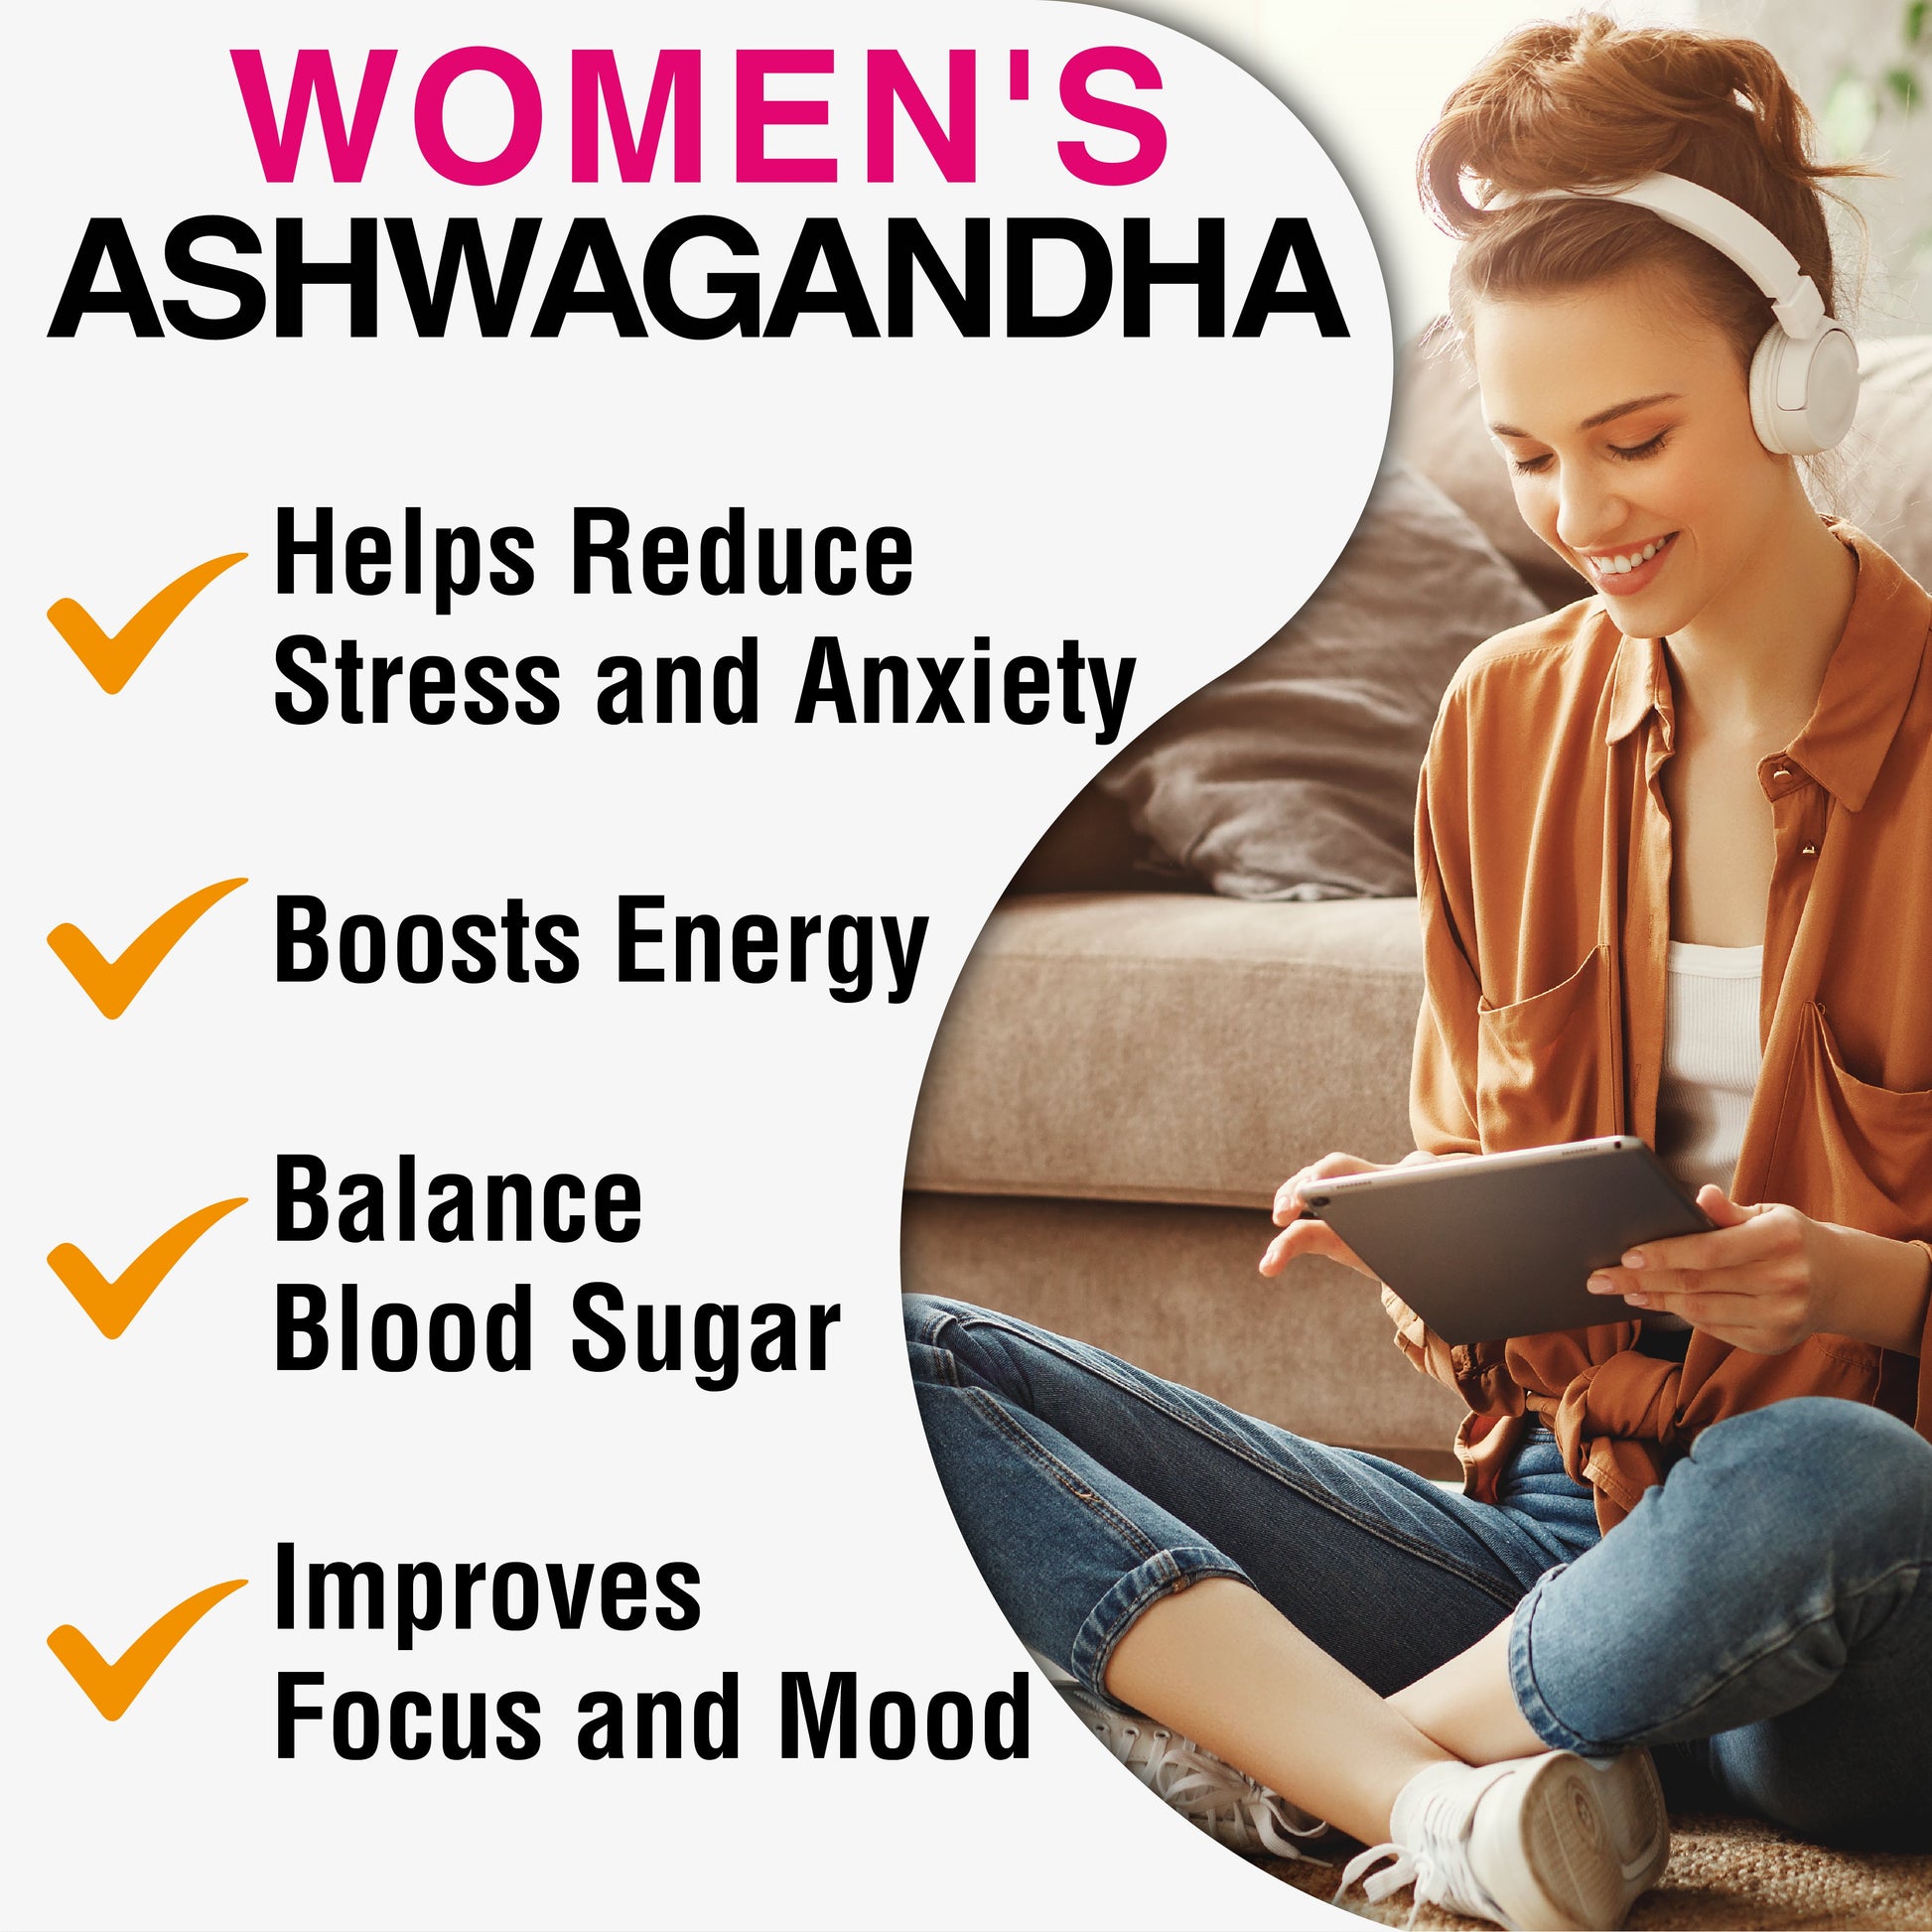 Infographic with benefits of taking ashwagandha: helps reduce stress and anxiety, boosts energy, balance blood sugar, improves focus and mood